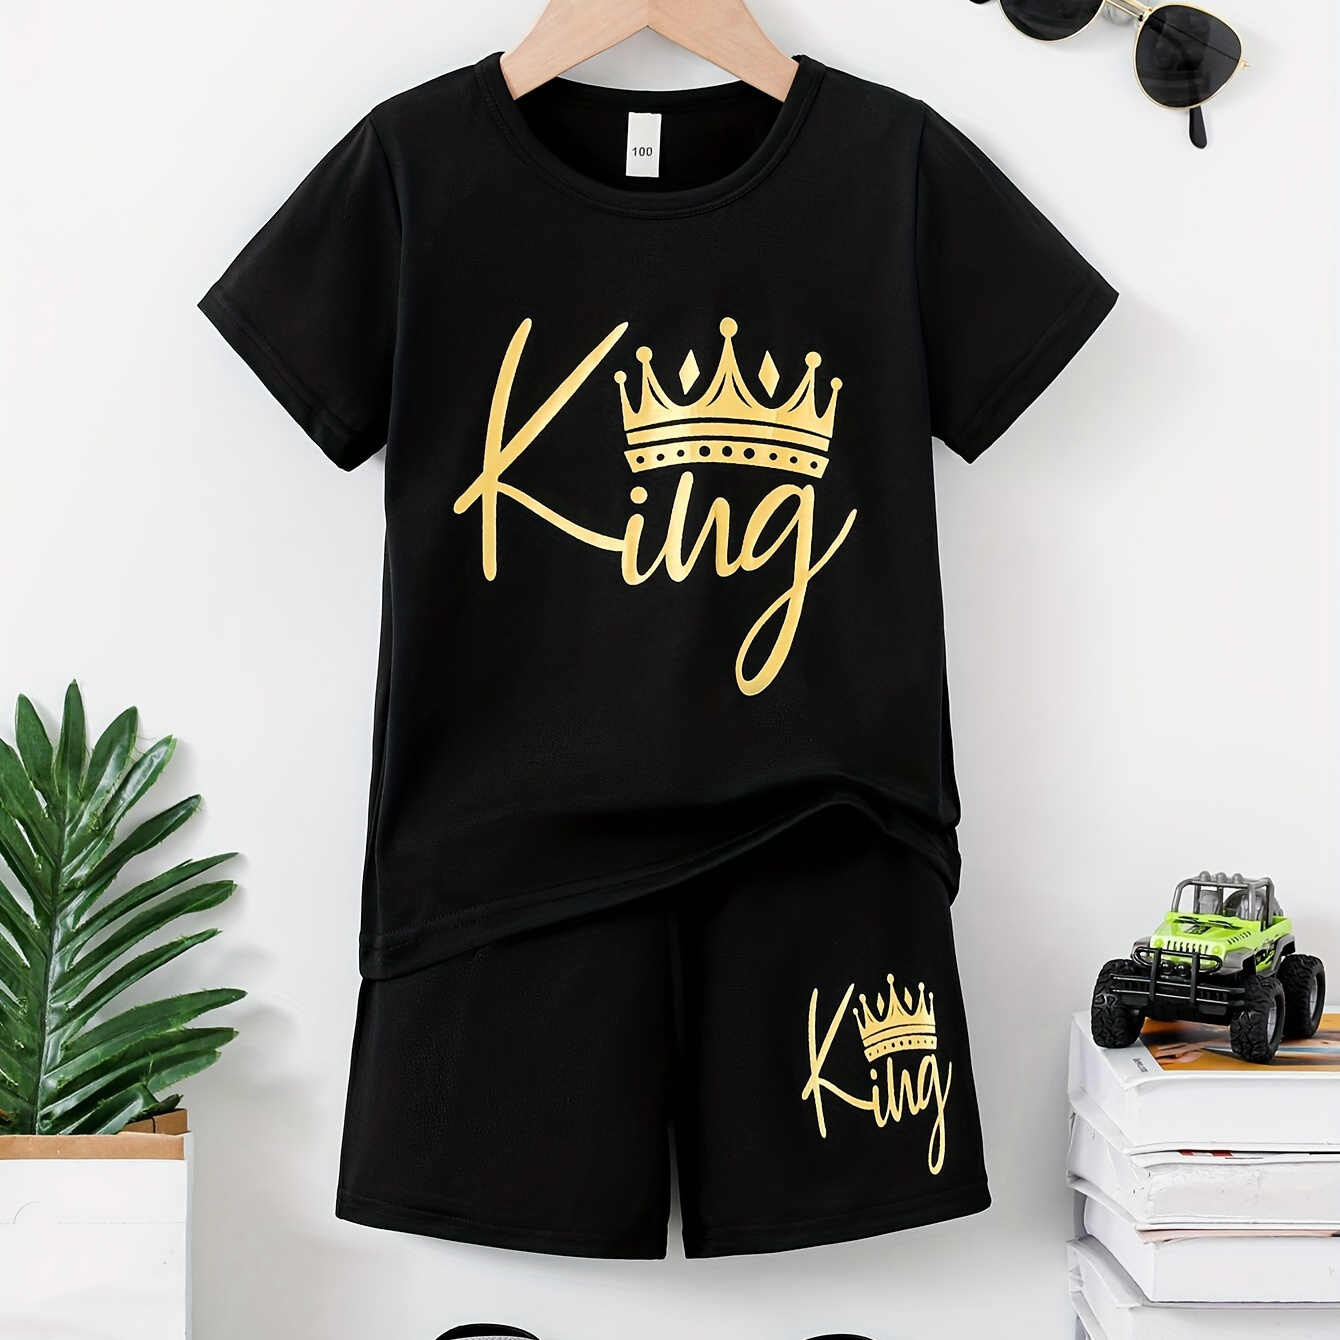 

2pcs Boys Casual Cool King Letter Print Comfortable Versatile Short Sleeve T-shirt & Shorts Set, Cool, Lightweight And Comfy Summer Clothes!